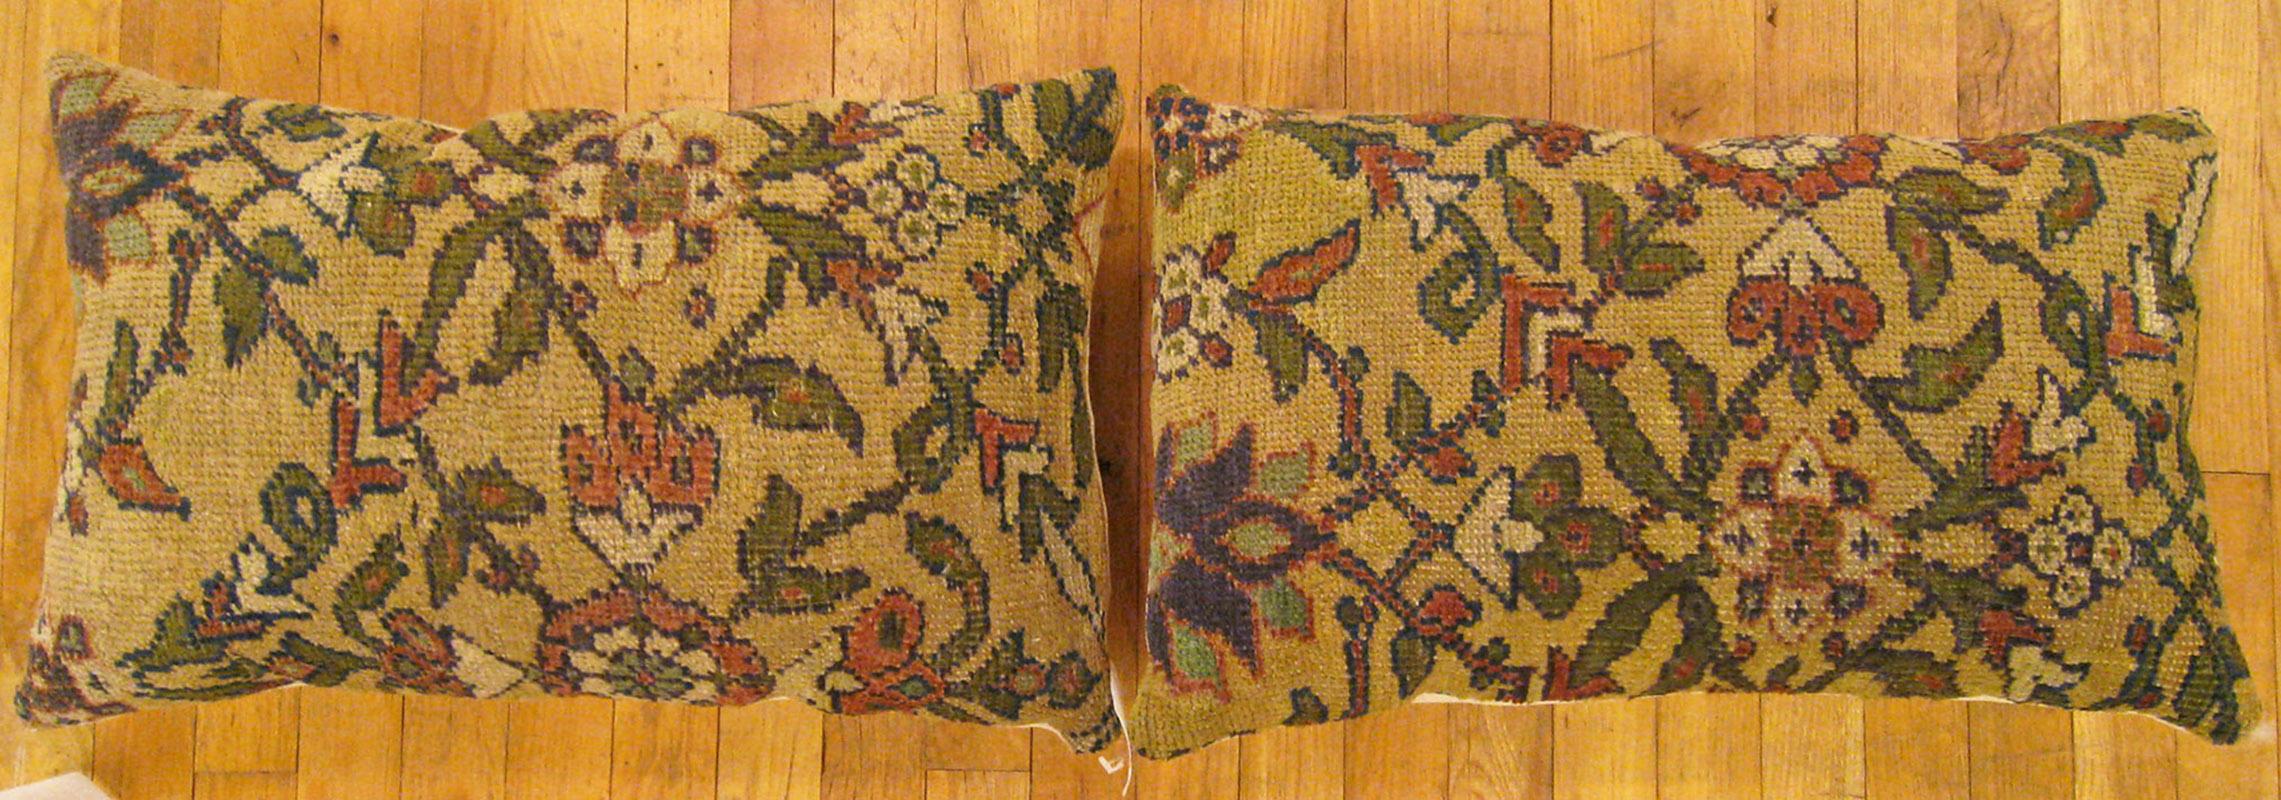 A Pair of Antique Persian Sultanabad Carpet Pillows ; size 2'0” x 1'3” Each.

An antique decorative pillows with floral elements allover a cream central field, size 2'0” x 1'3” each. This lovely decorative pillow features an antique fabric of a